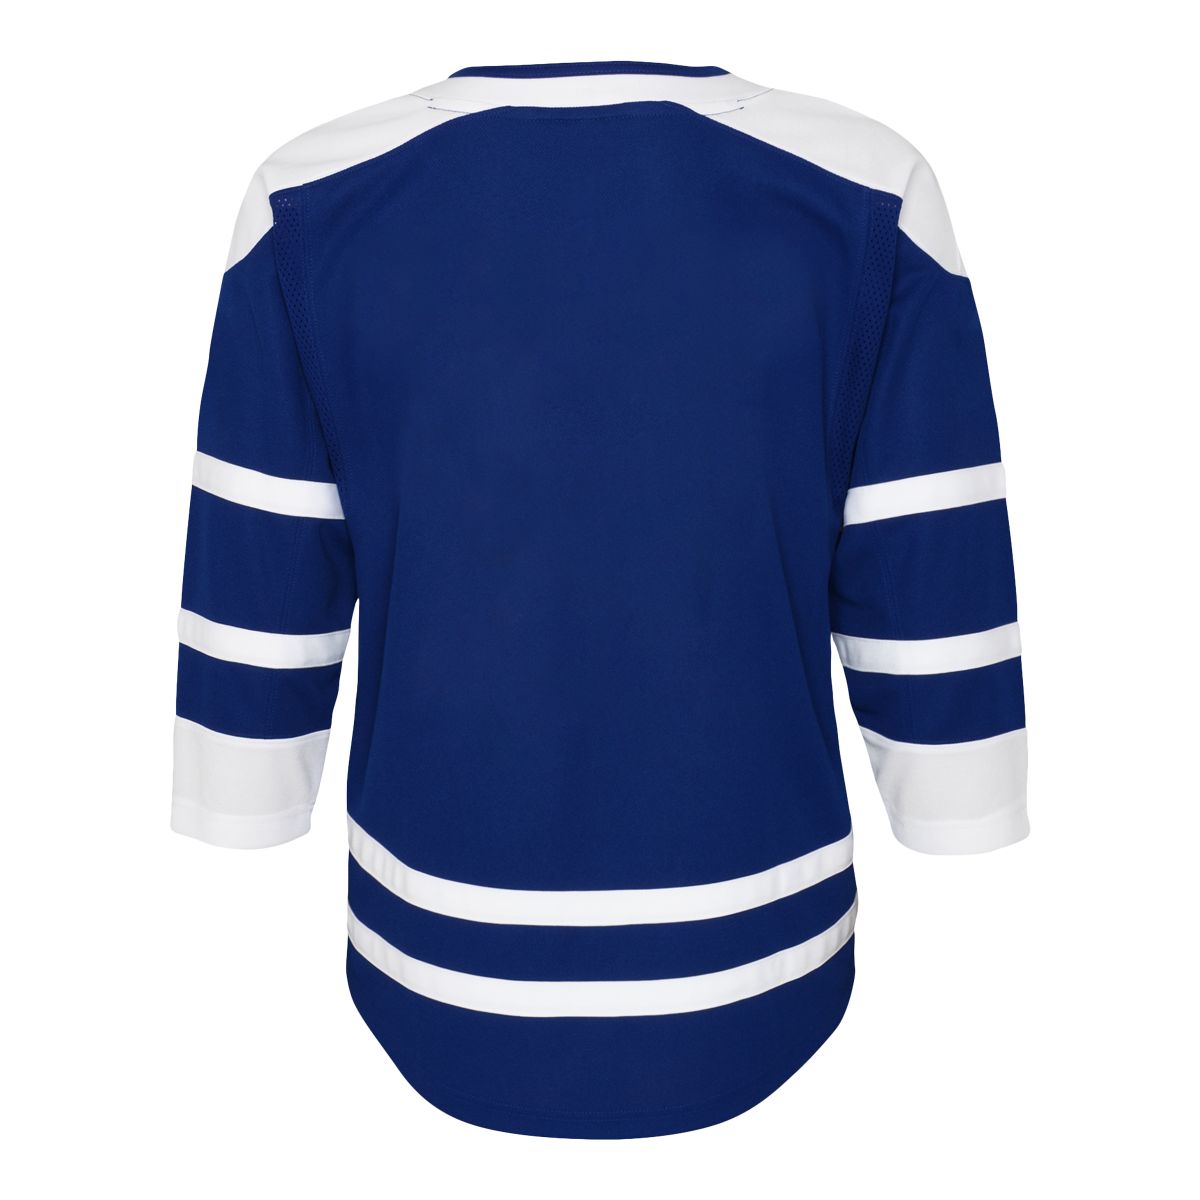 Outerstuff Reverse Retro Premier Jersey - Tampa Bay Lightning - Youth